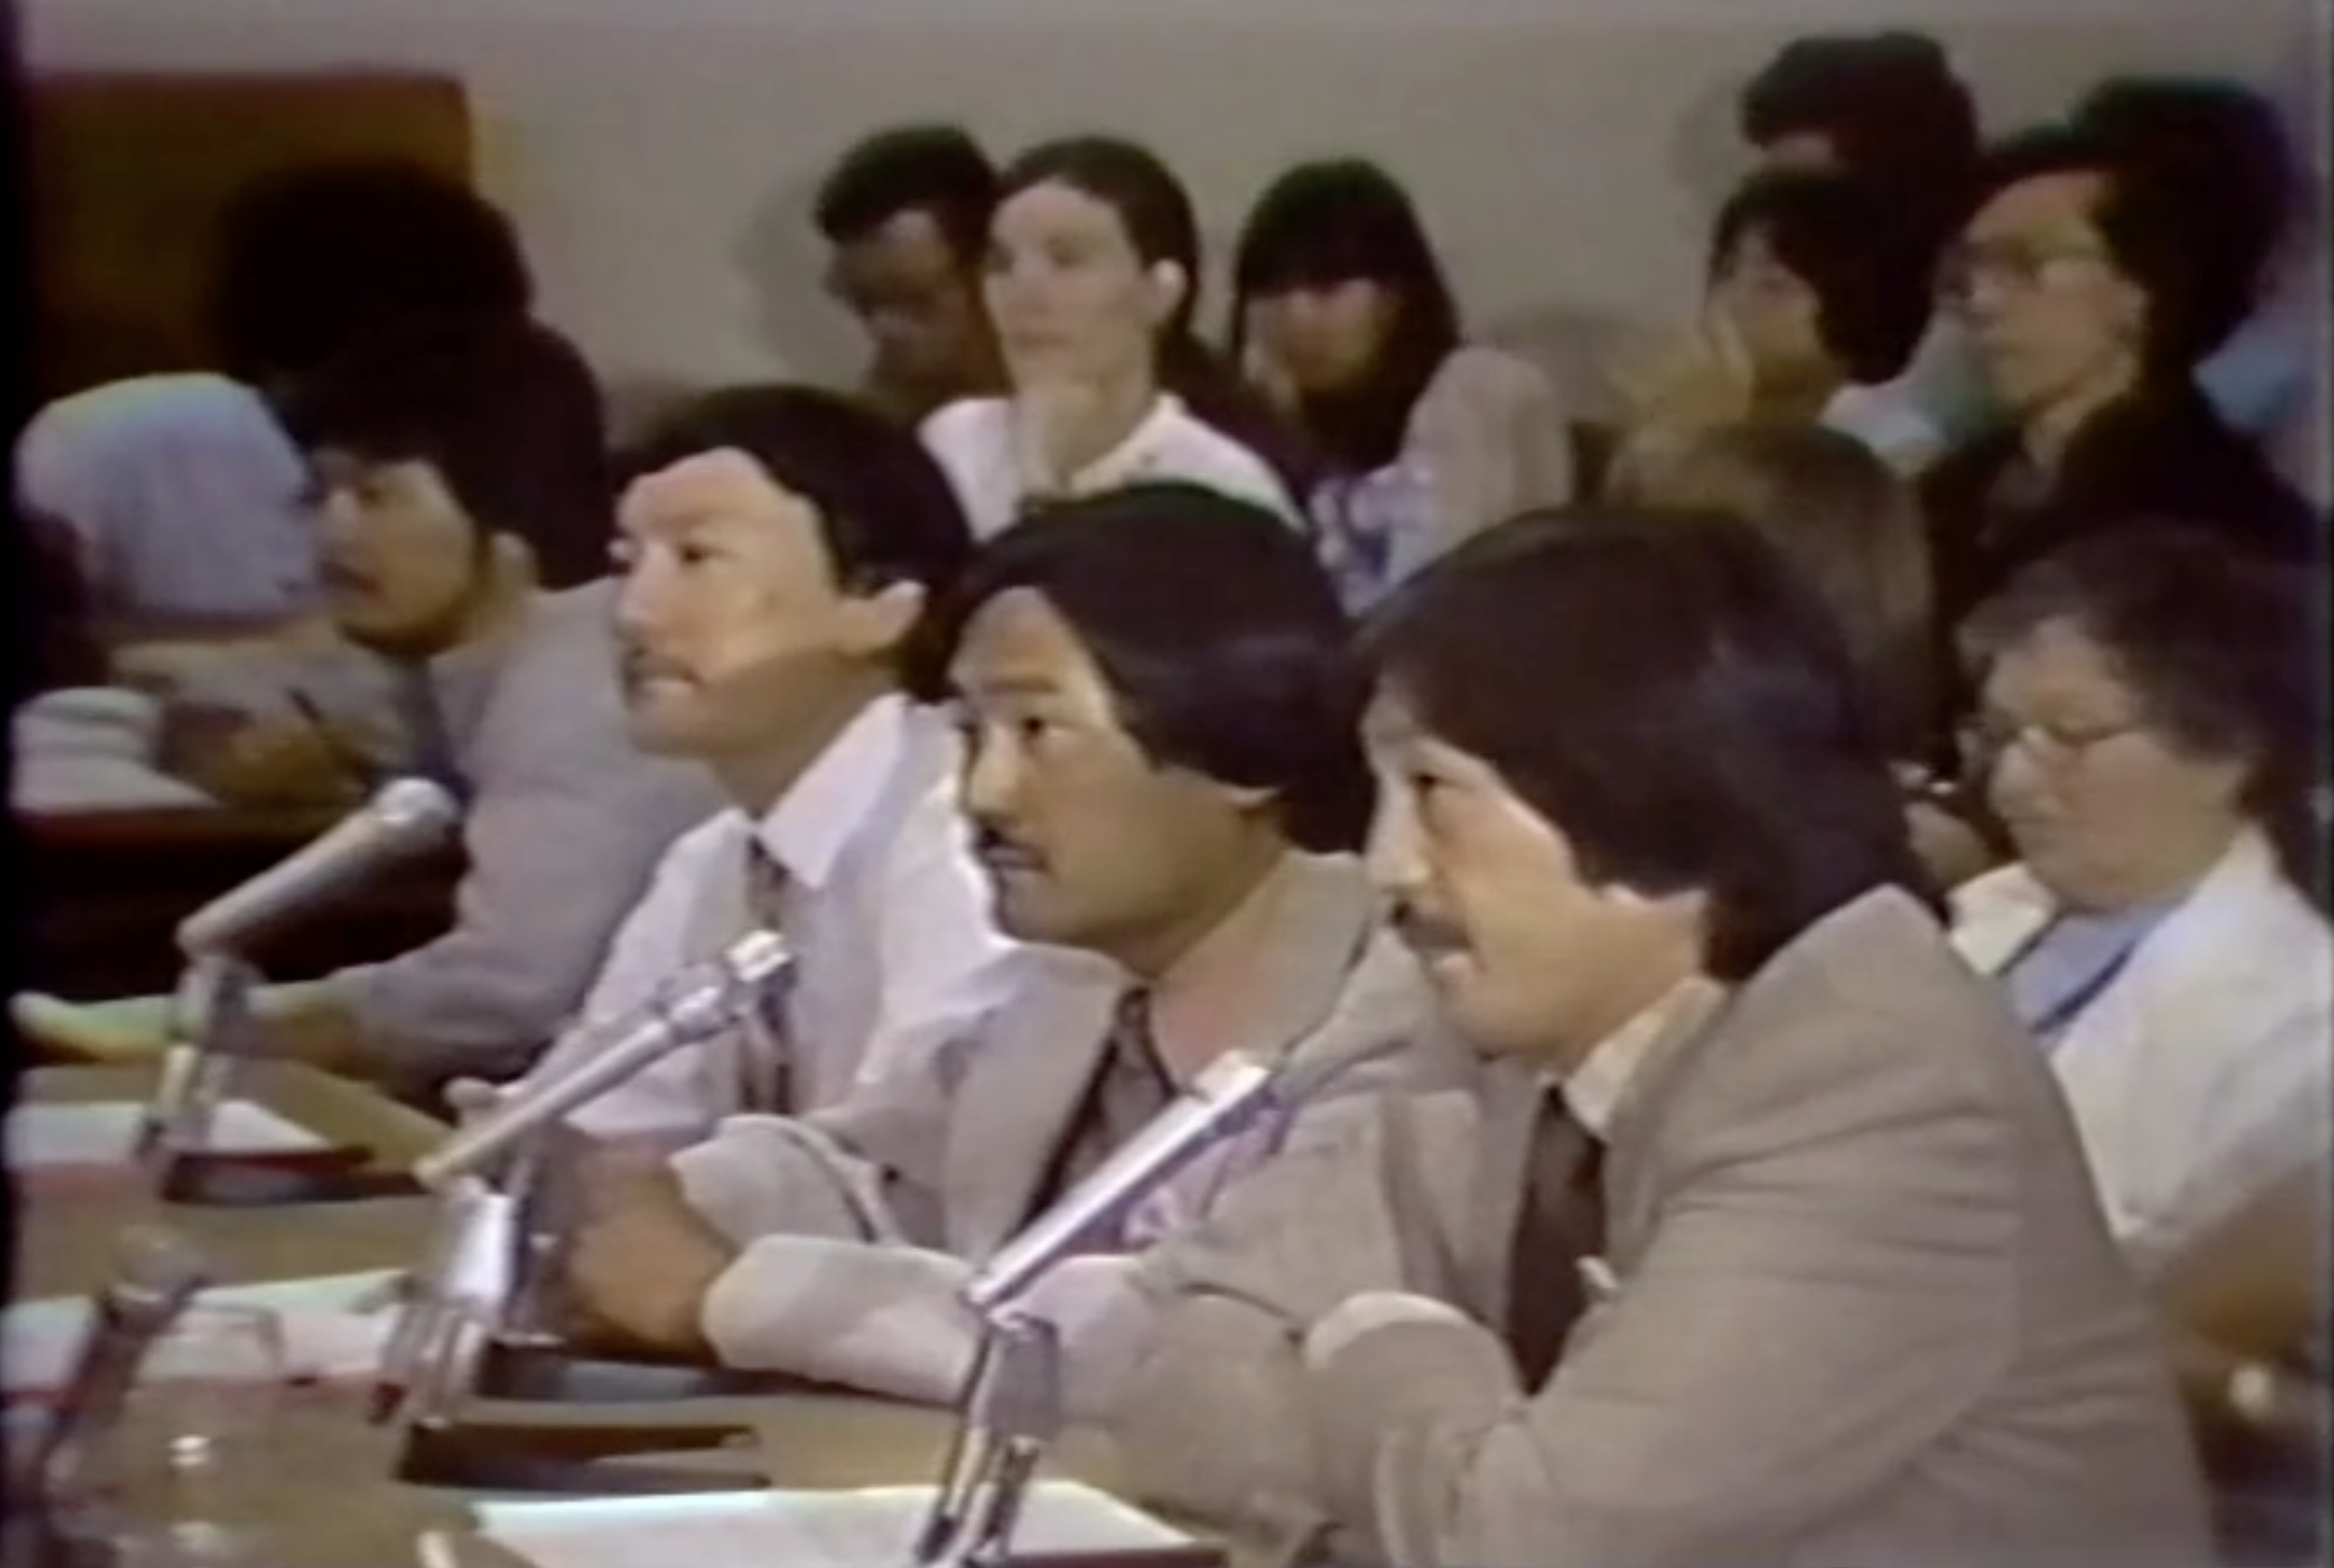 Alan Nishio at Commission on Wartime Relocation and Internment of Civilians (CWRIC) Los Angeles Hearings (1981)